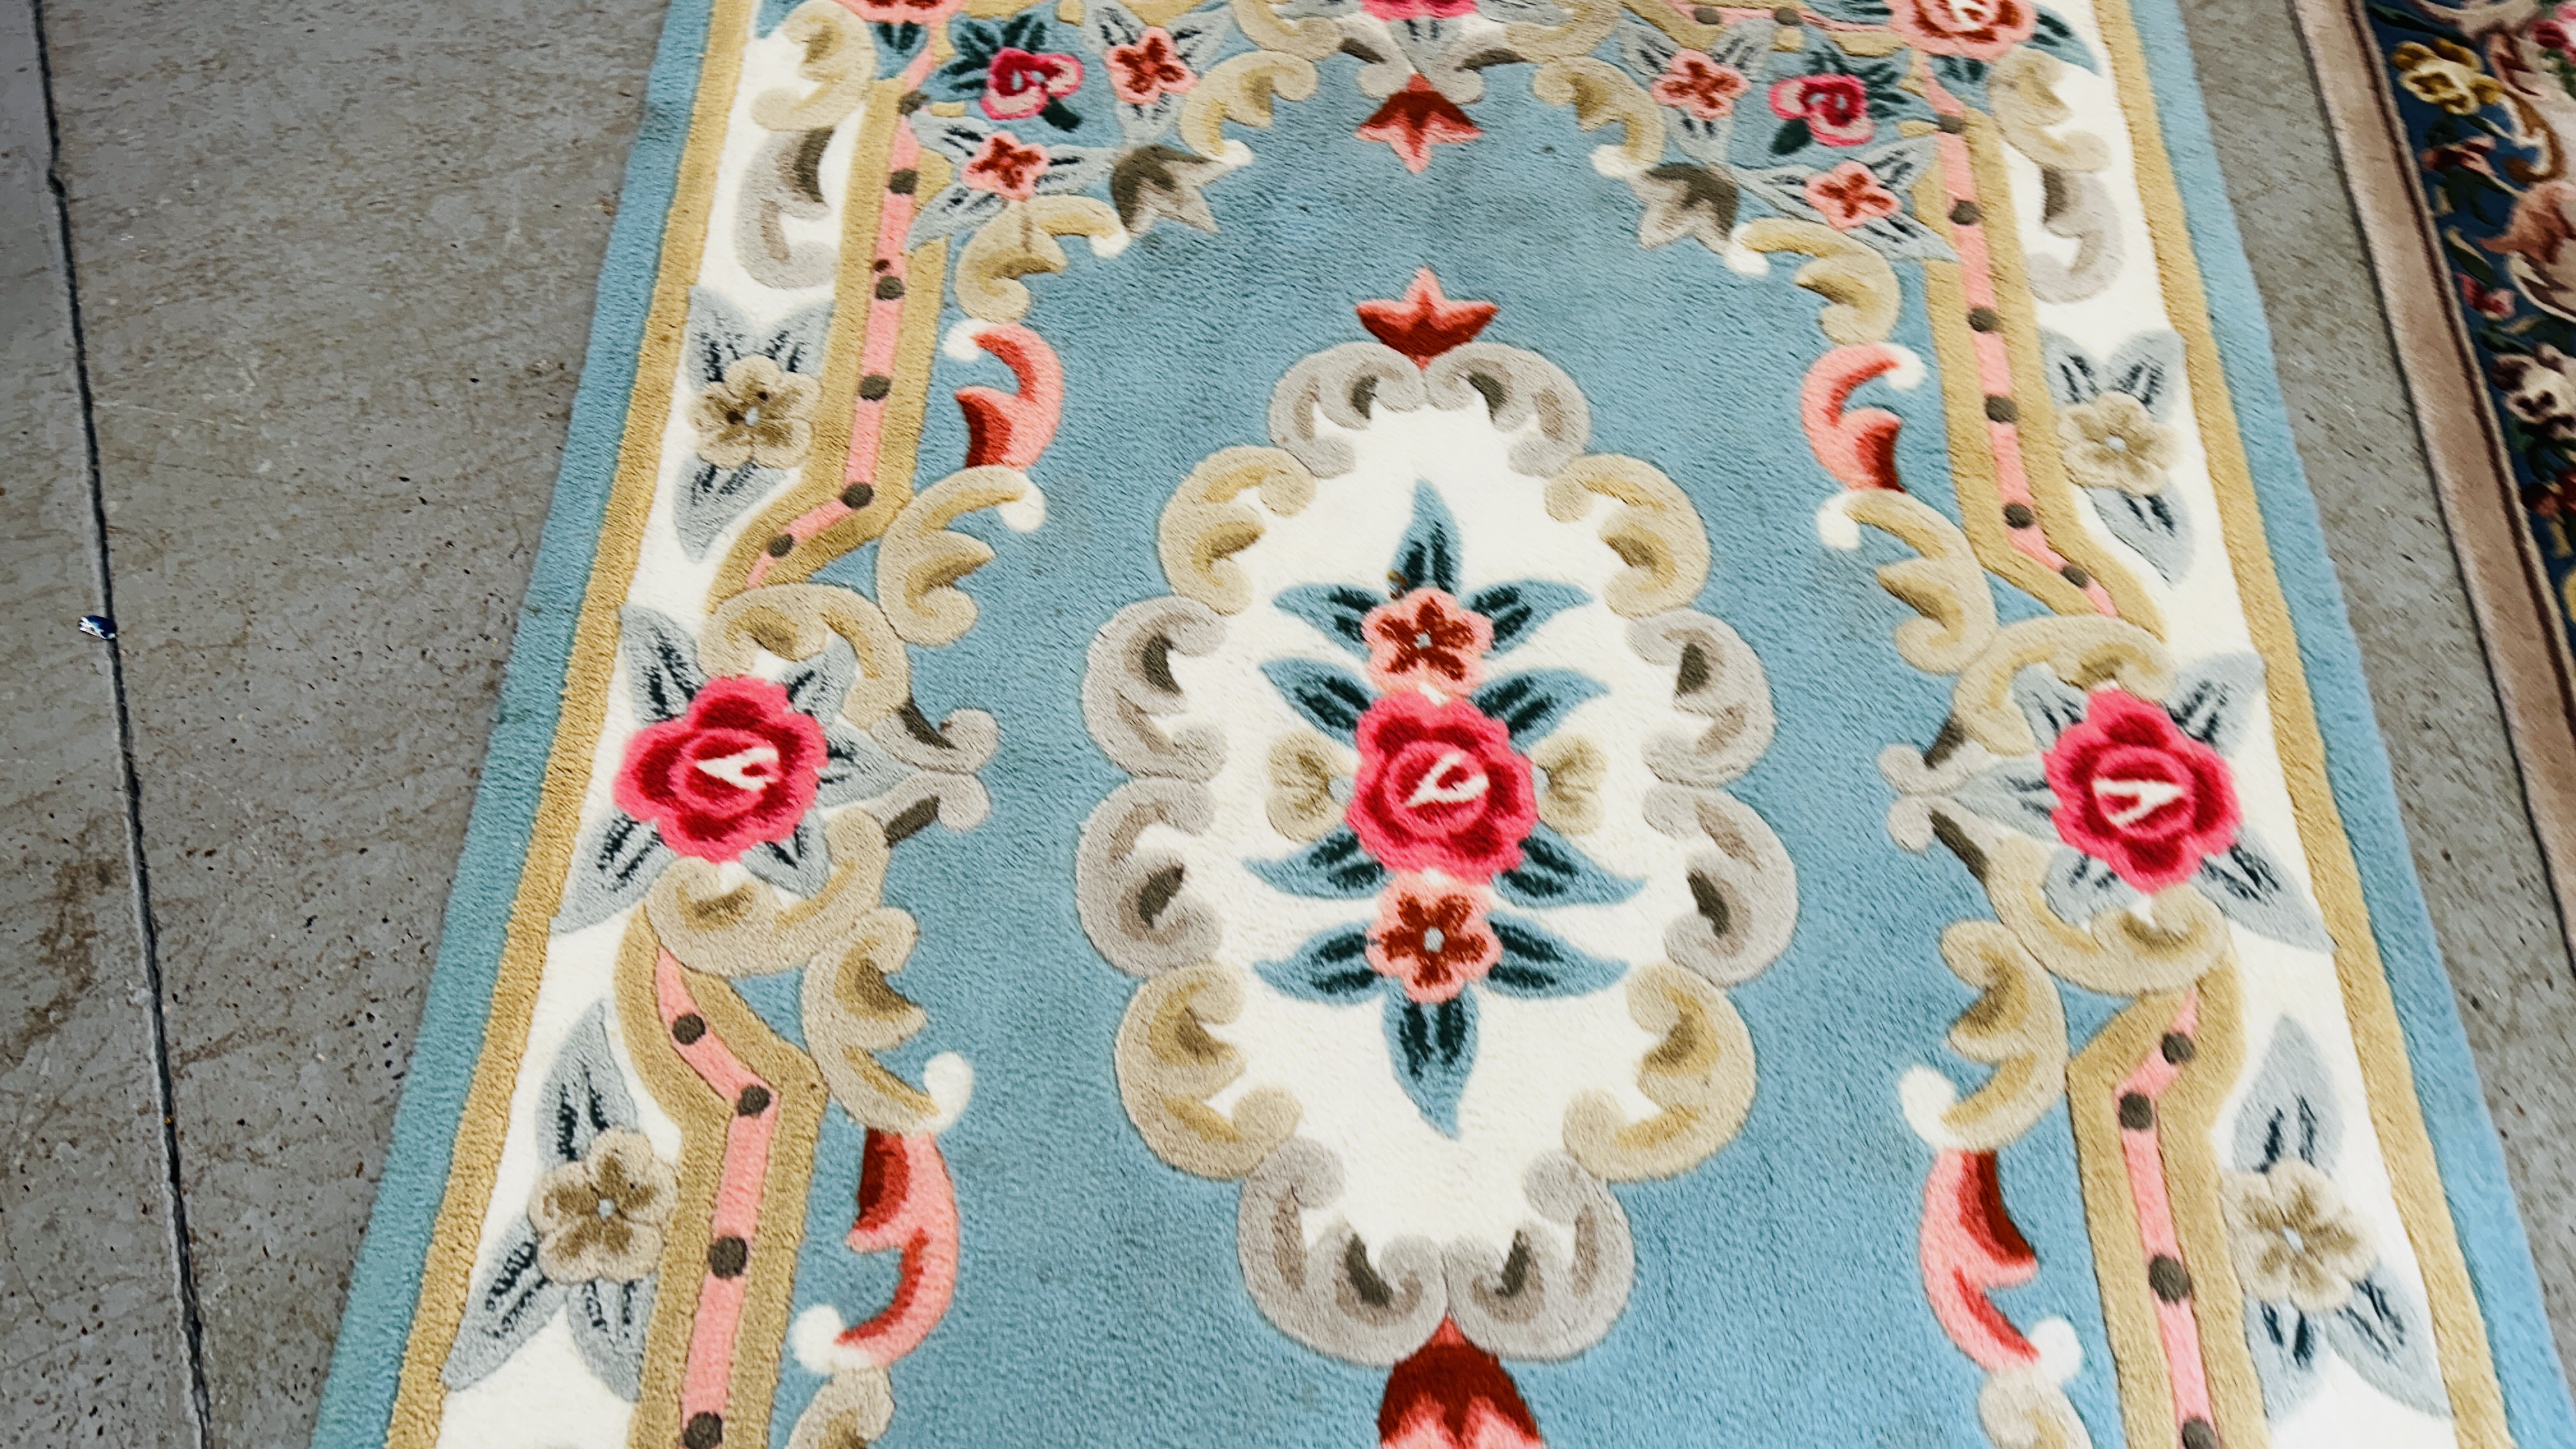 TWO DEEP PILE ORIENTAL DESIGN RUGS 193 X 92CM AND 184 X 123CM AND SMALL BLUE PATTERNED RUG 102CM X - Image 5 of 7